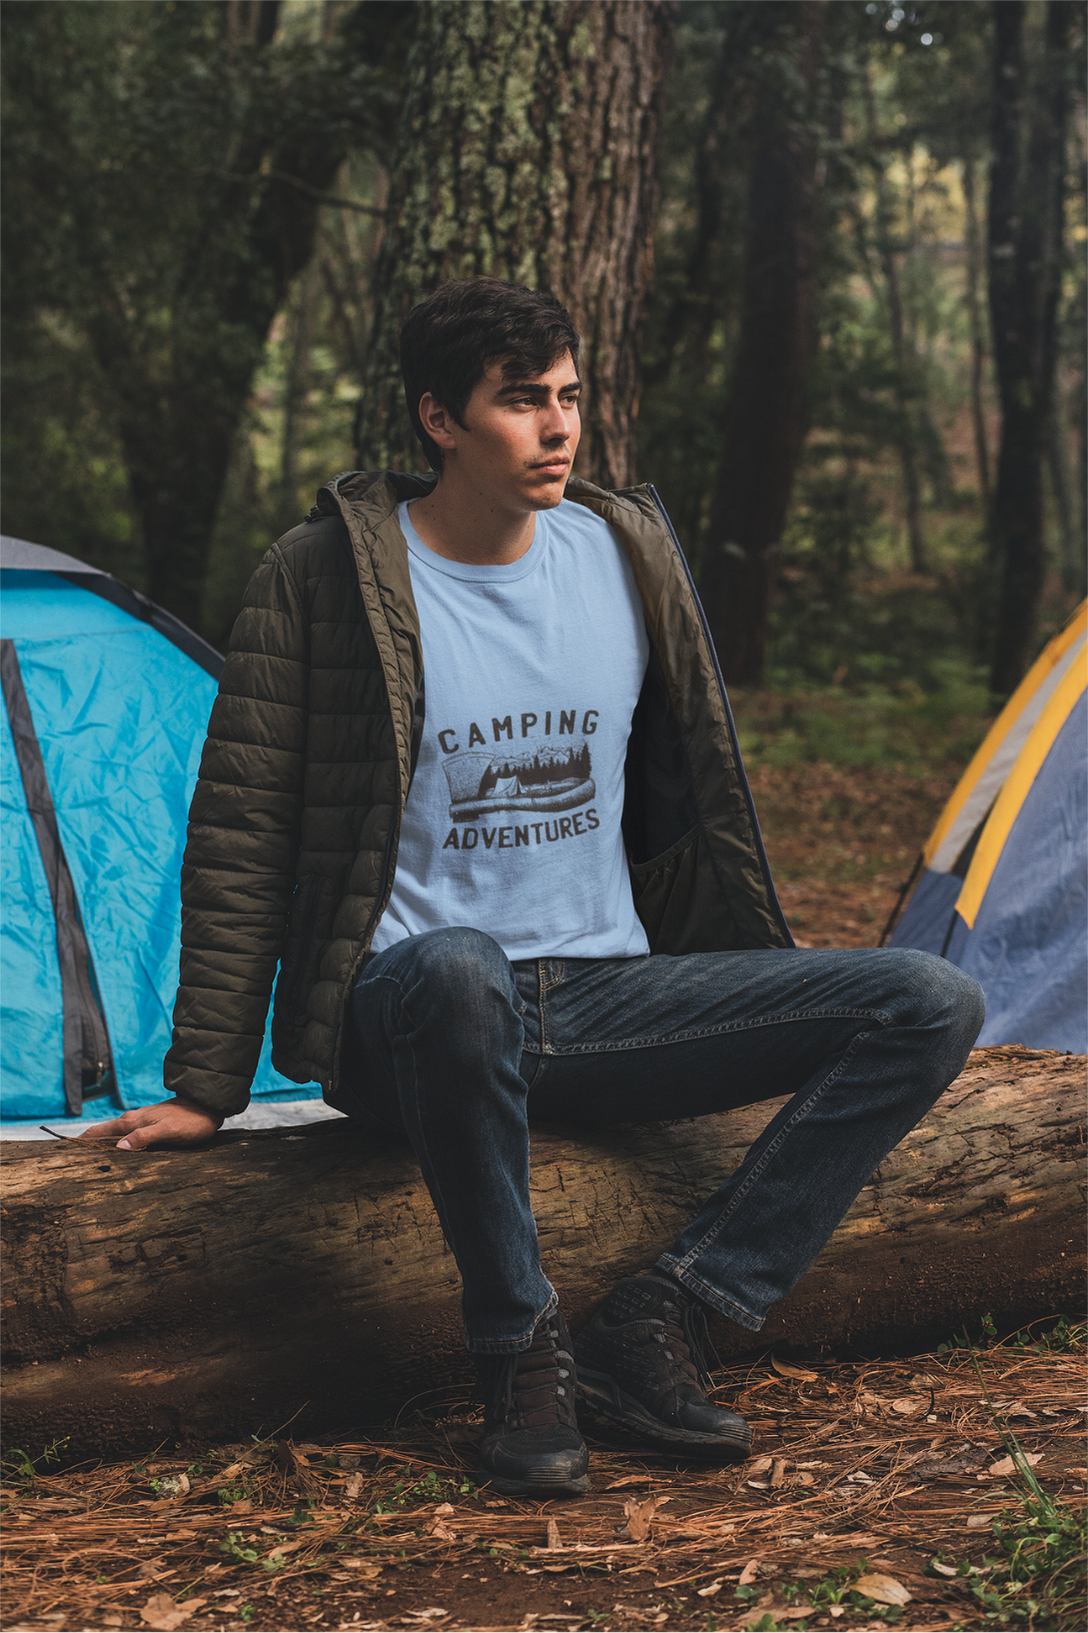 Camping Adventures Printed T-Shirt For Men - WowWaves - 5